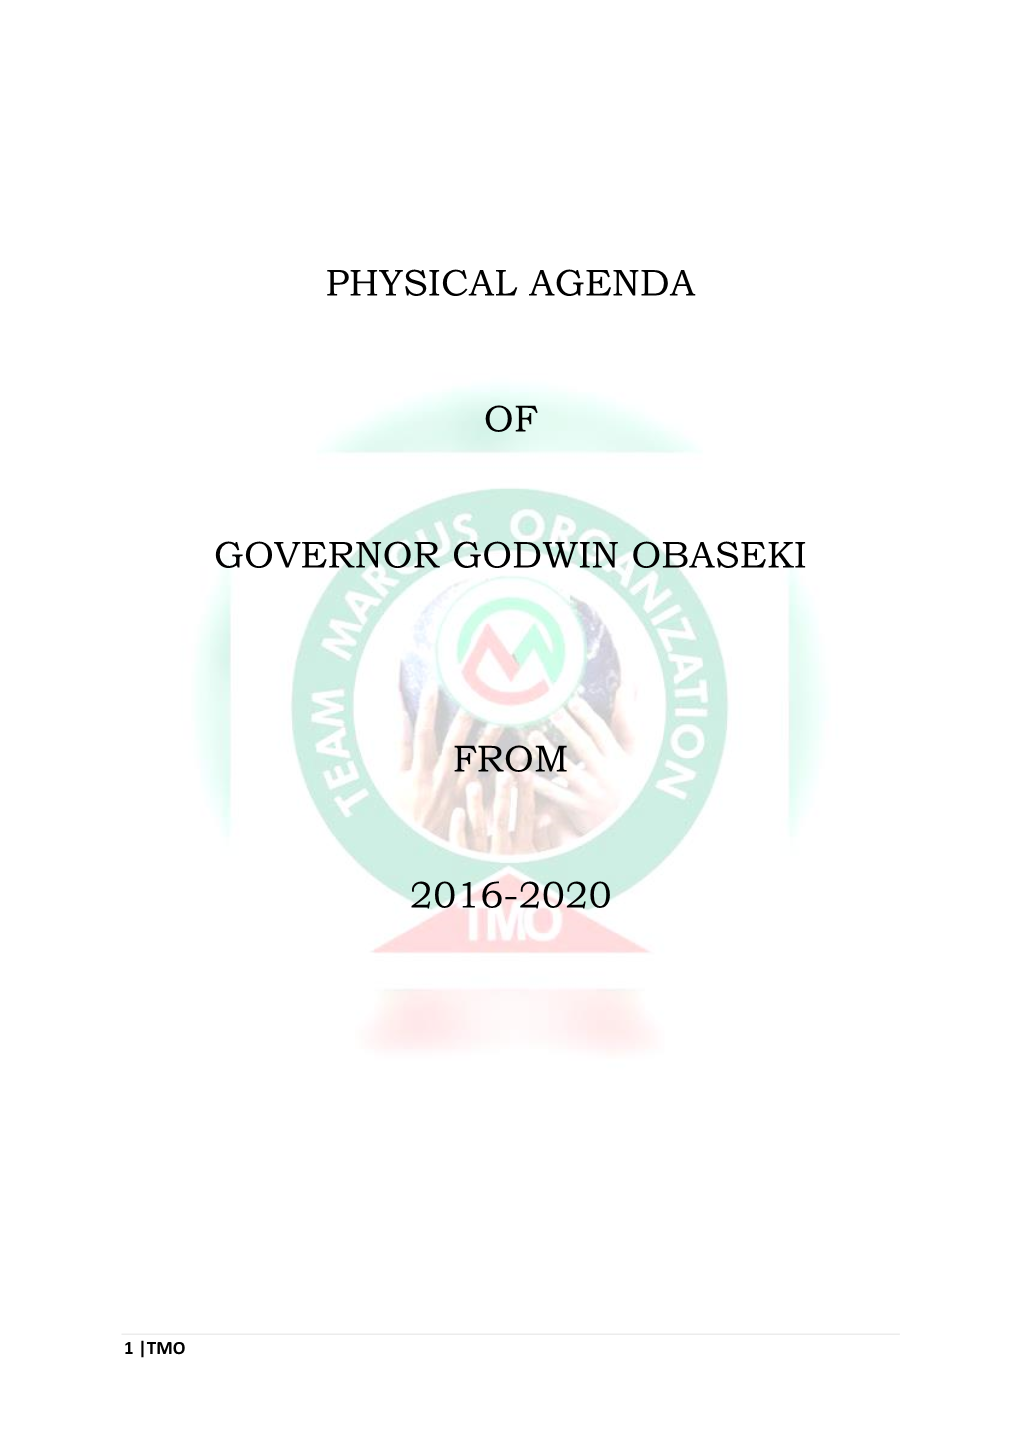 Physical Agenda of Governor Godwin Obaseki from 2016-2020